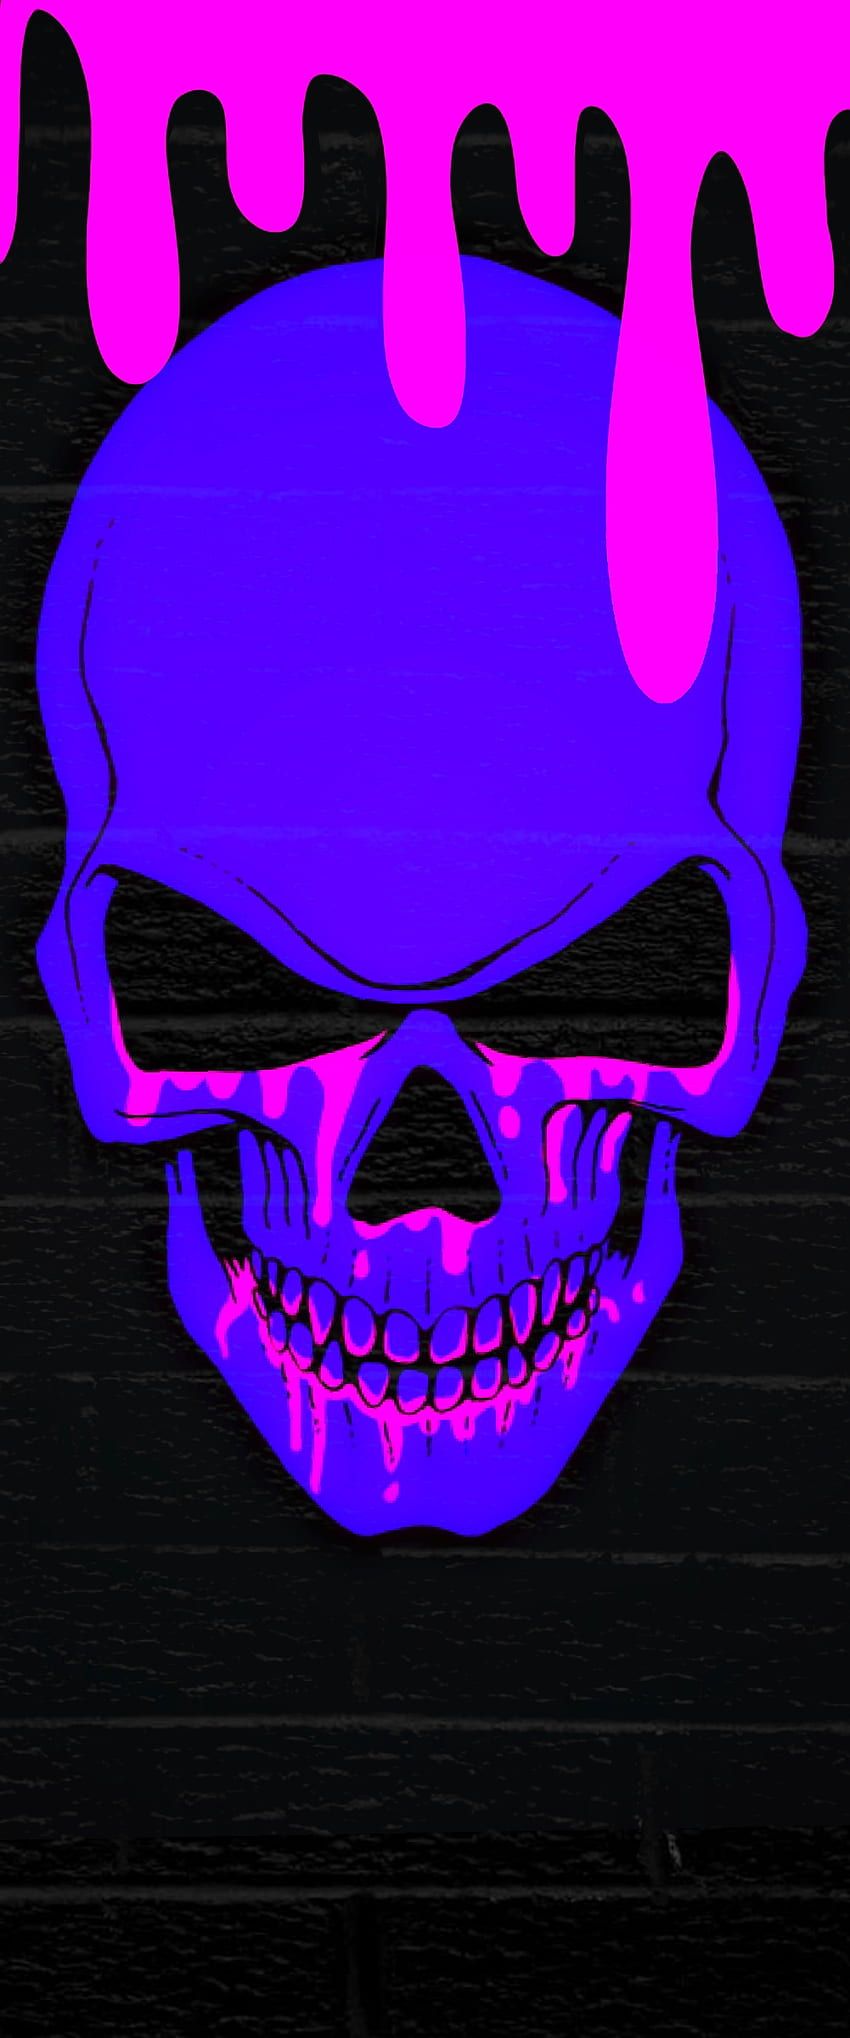 A skull with a purple background - Skull